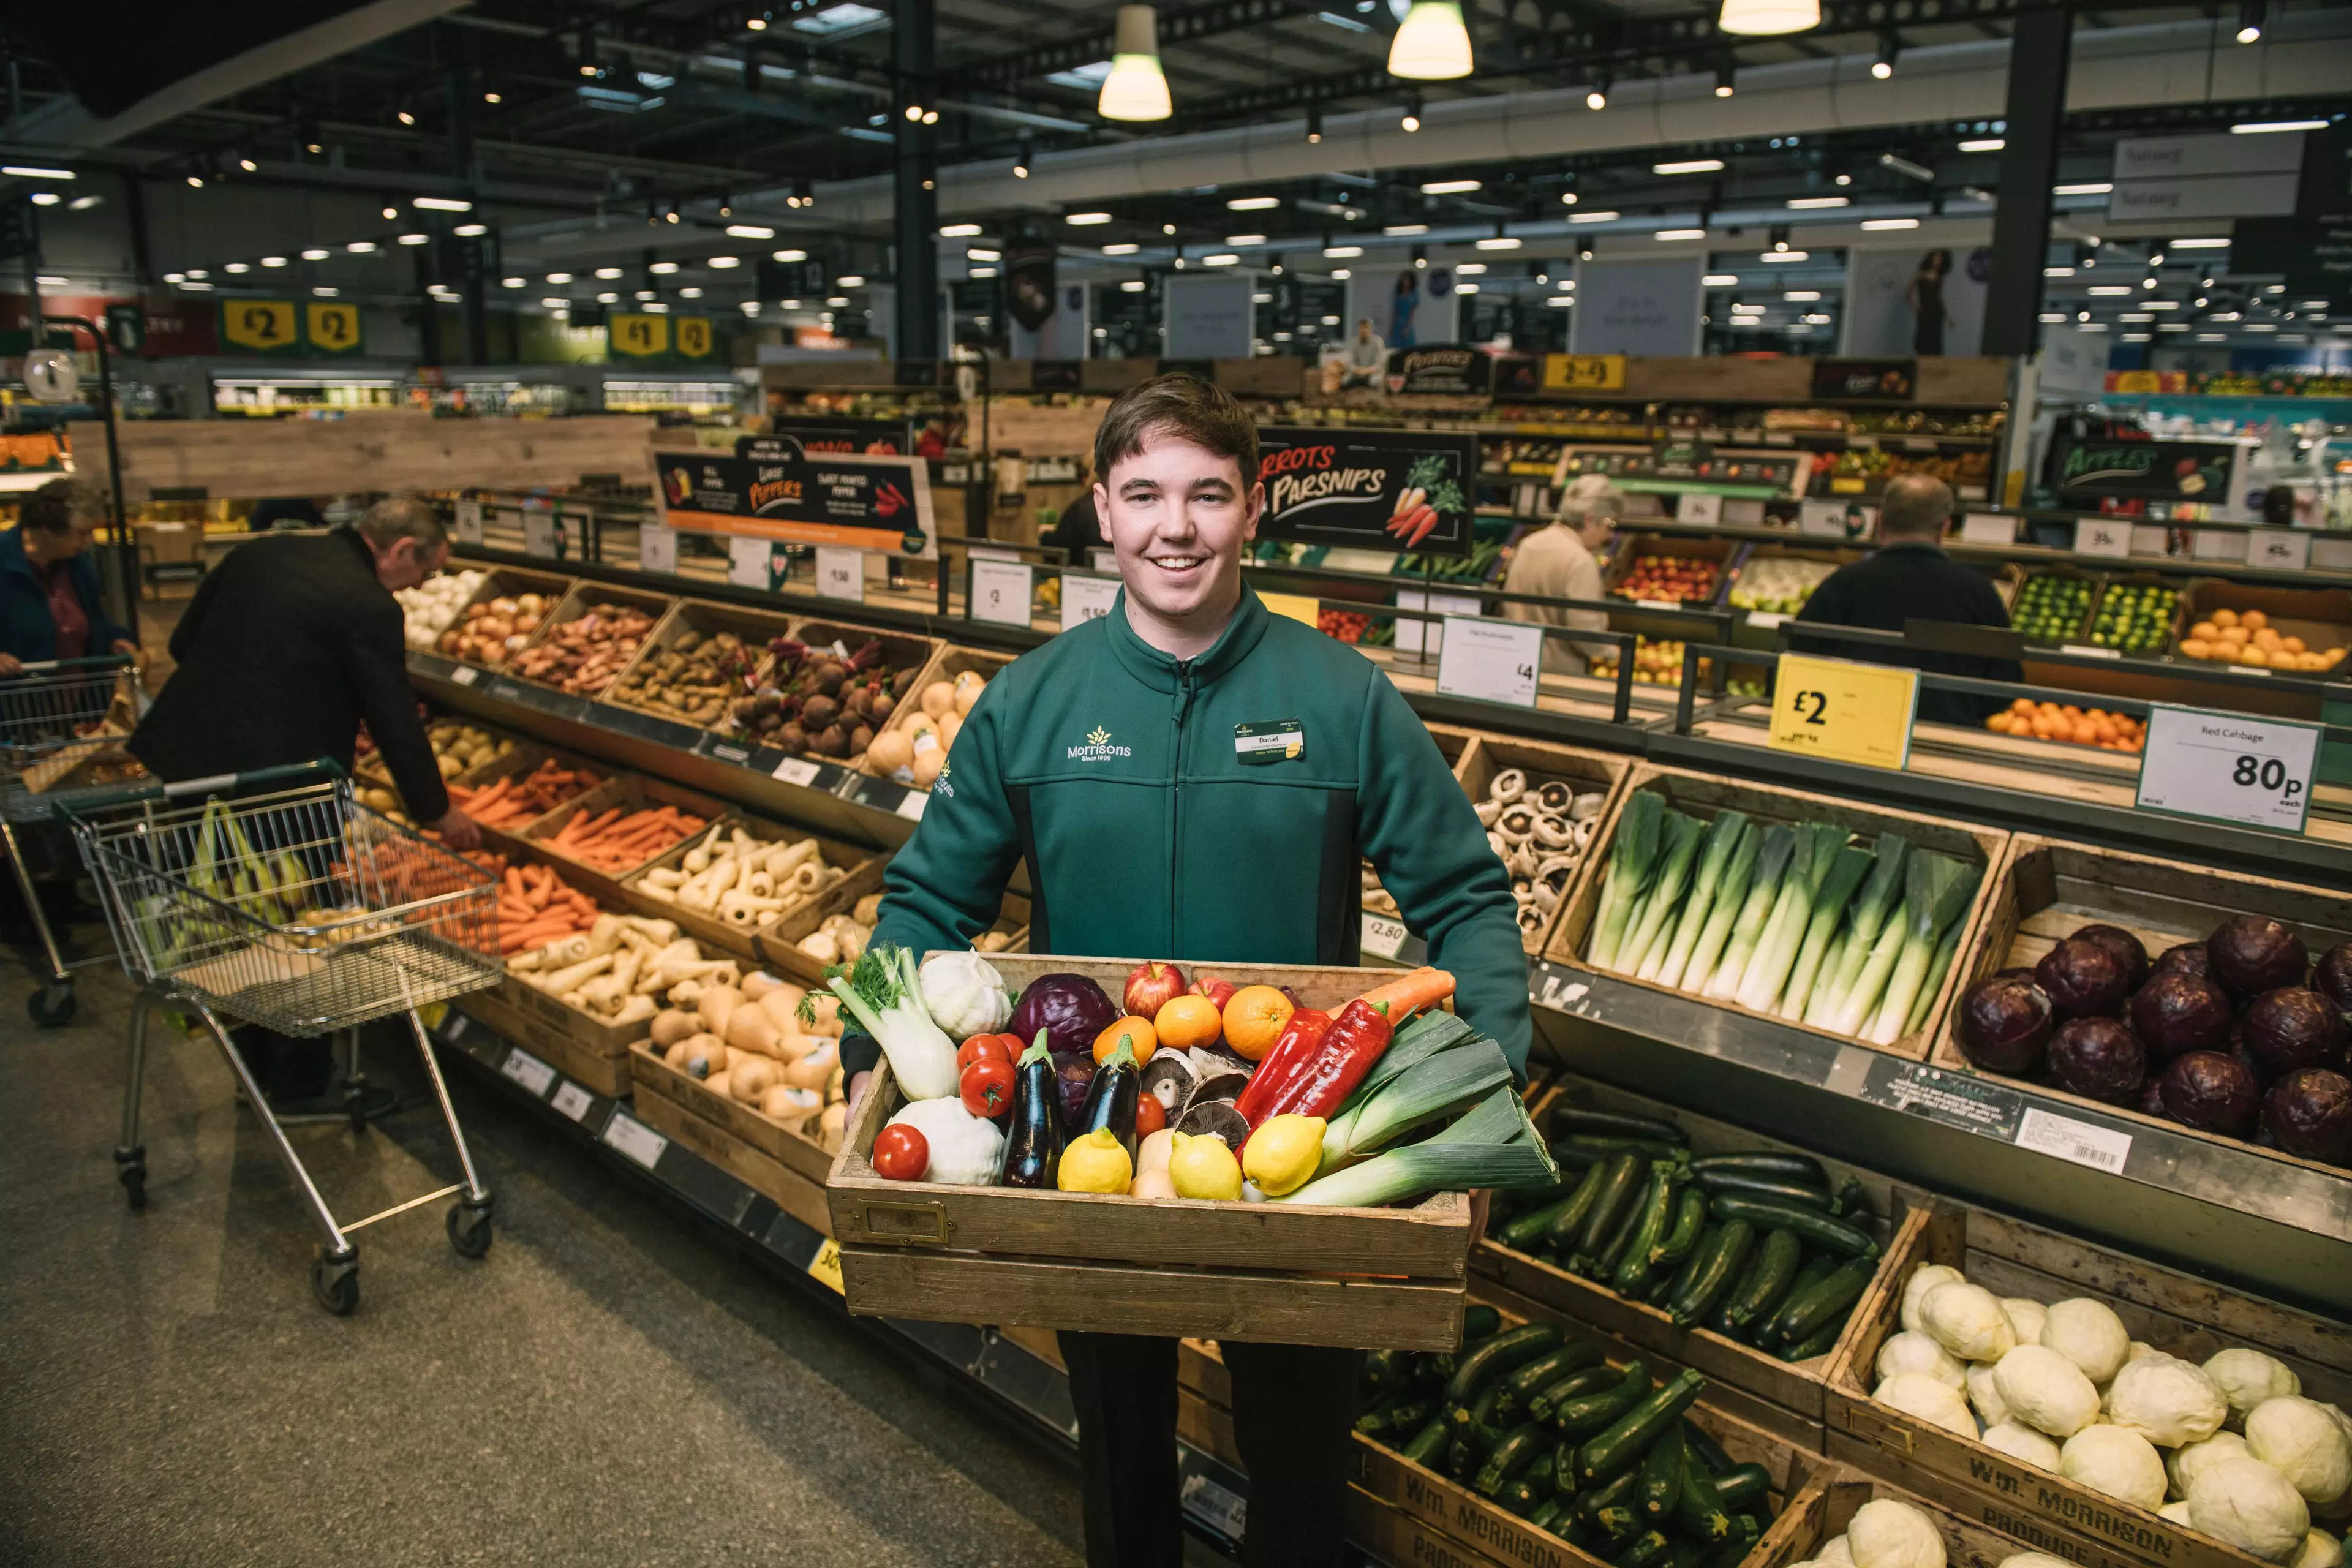 Customers will be able to choose from 127 varieties of fruit and veg - all plastic-free.